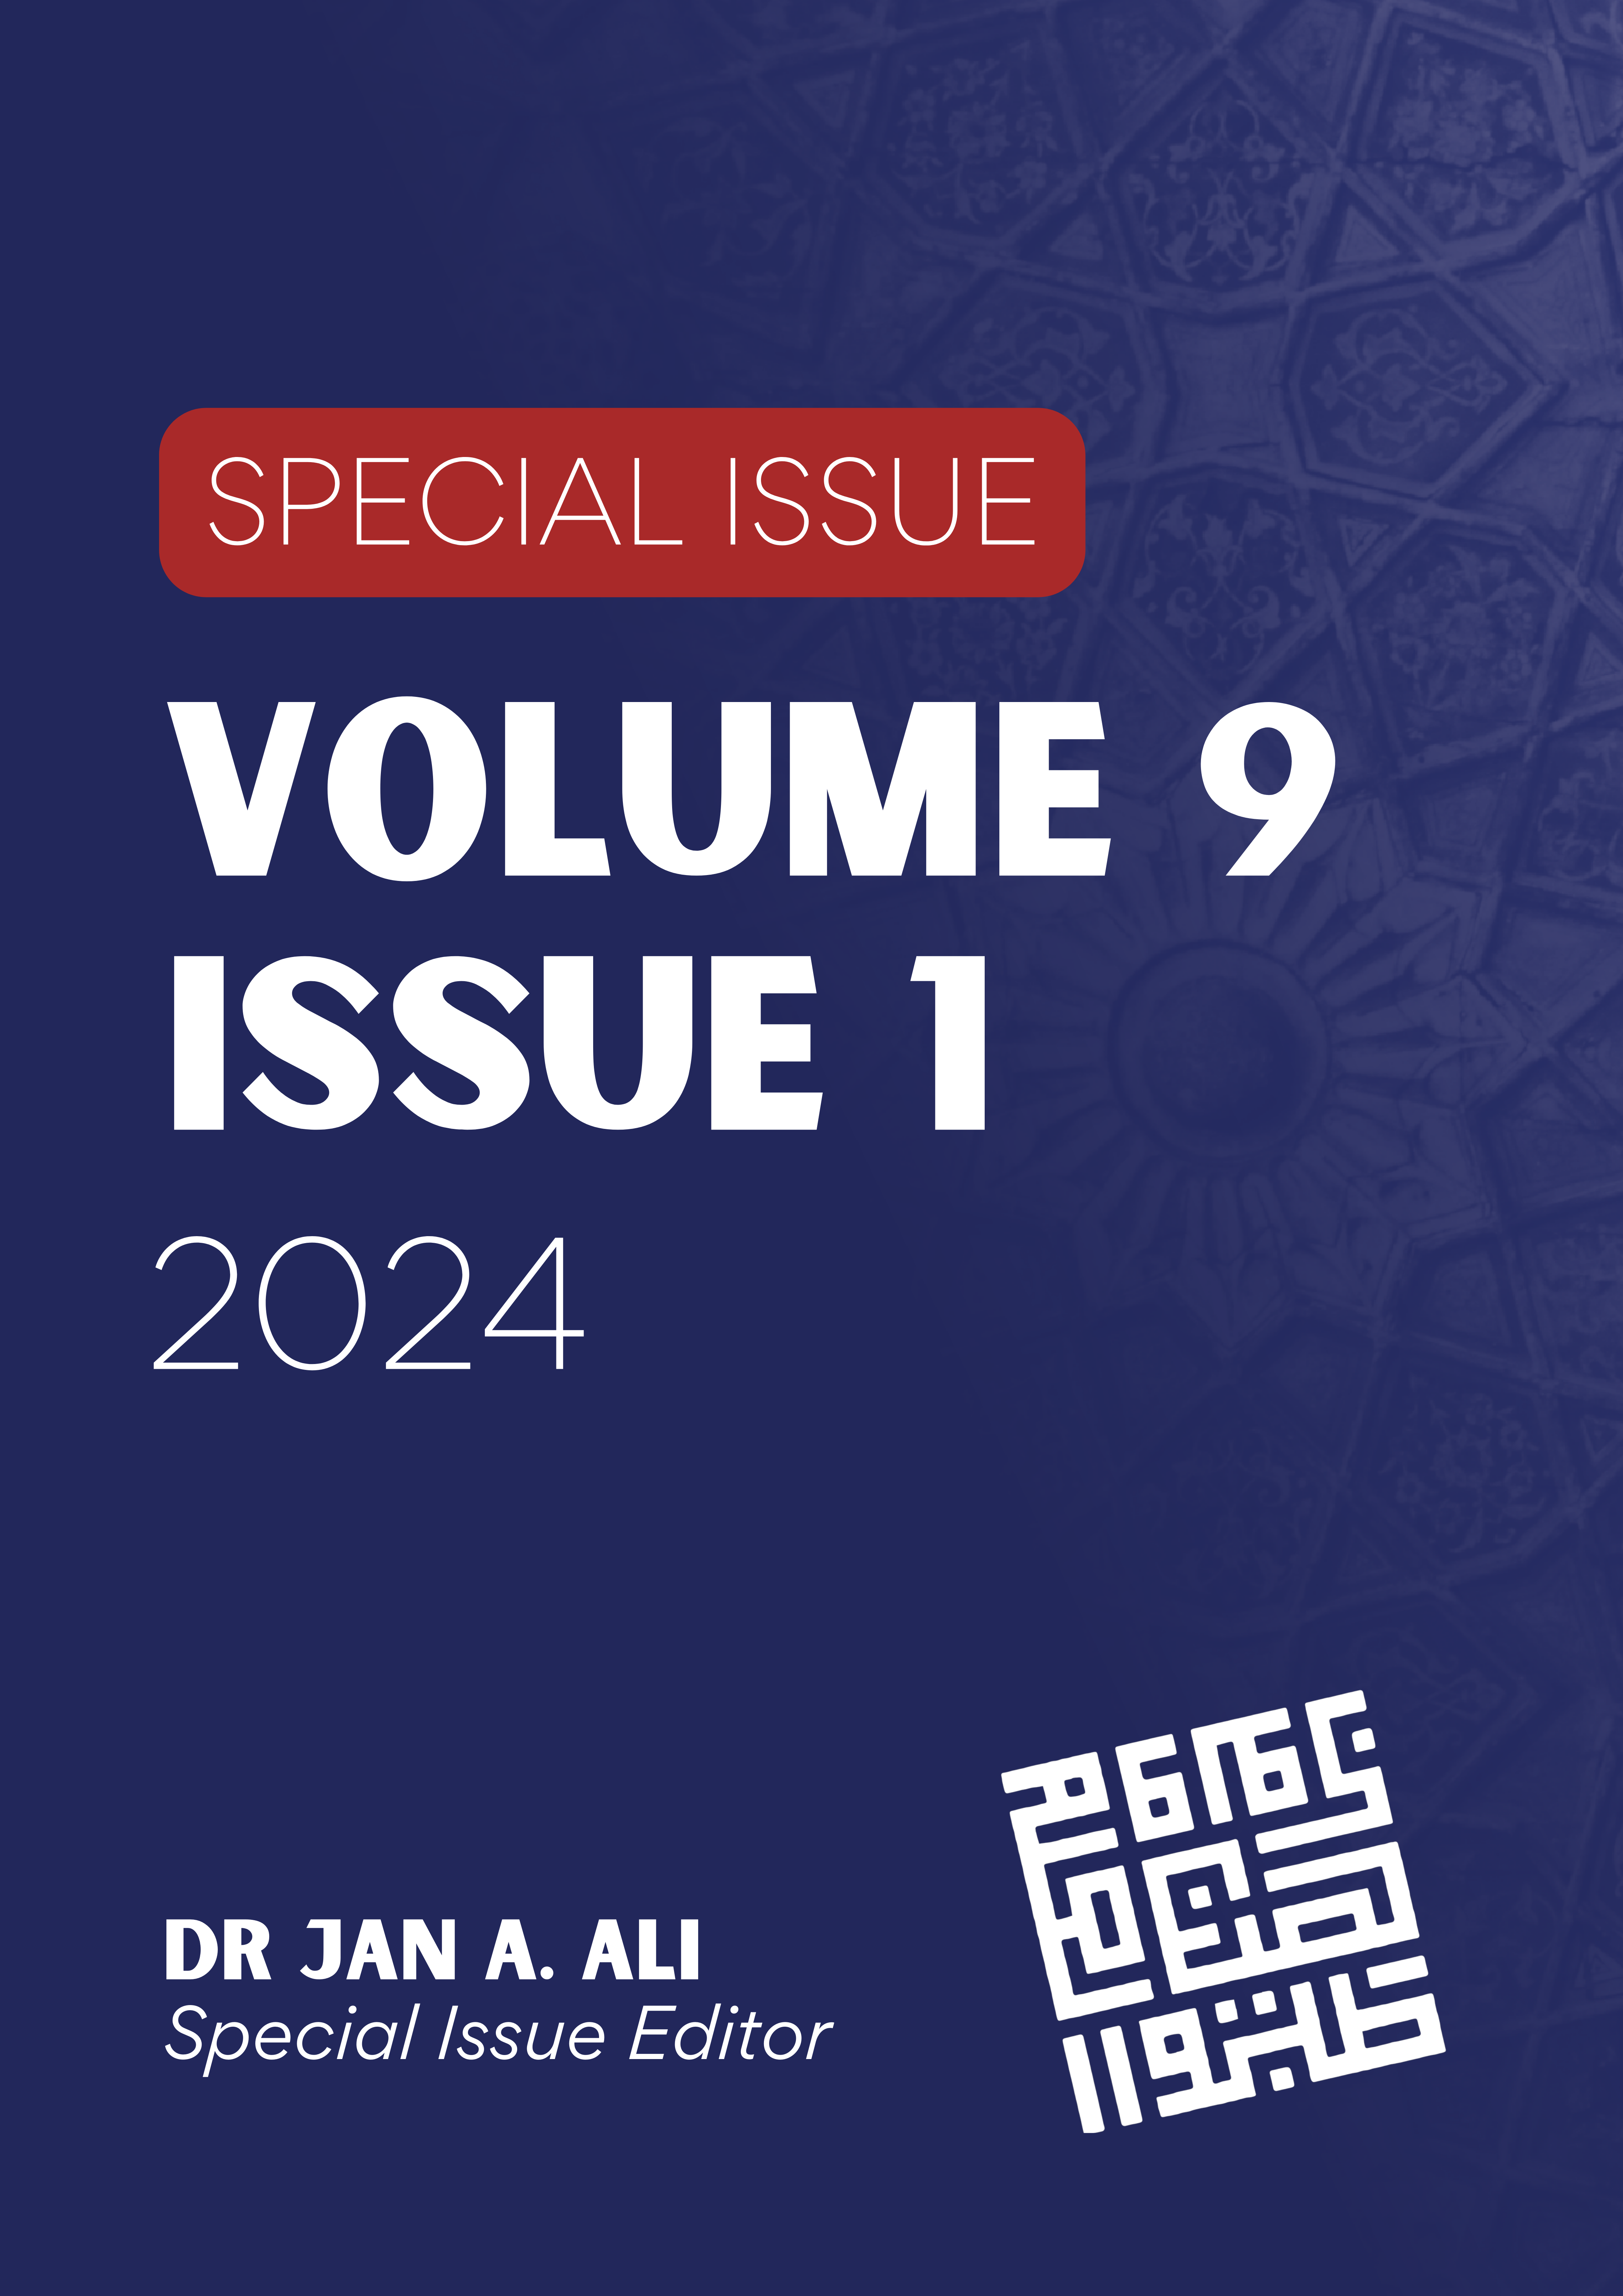 Australian Journal of Islamic Studies - Volume 9, Issue 1 Special Issue